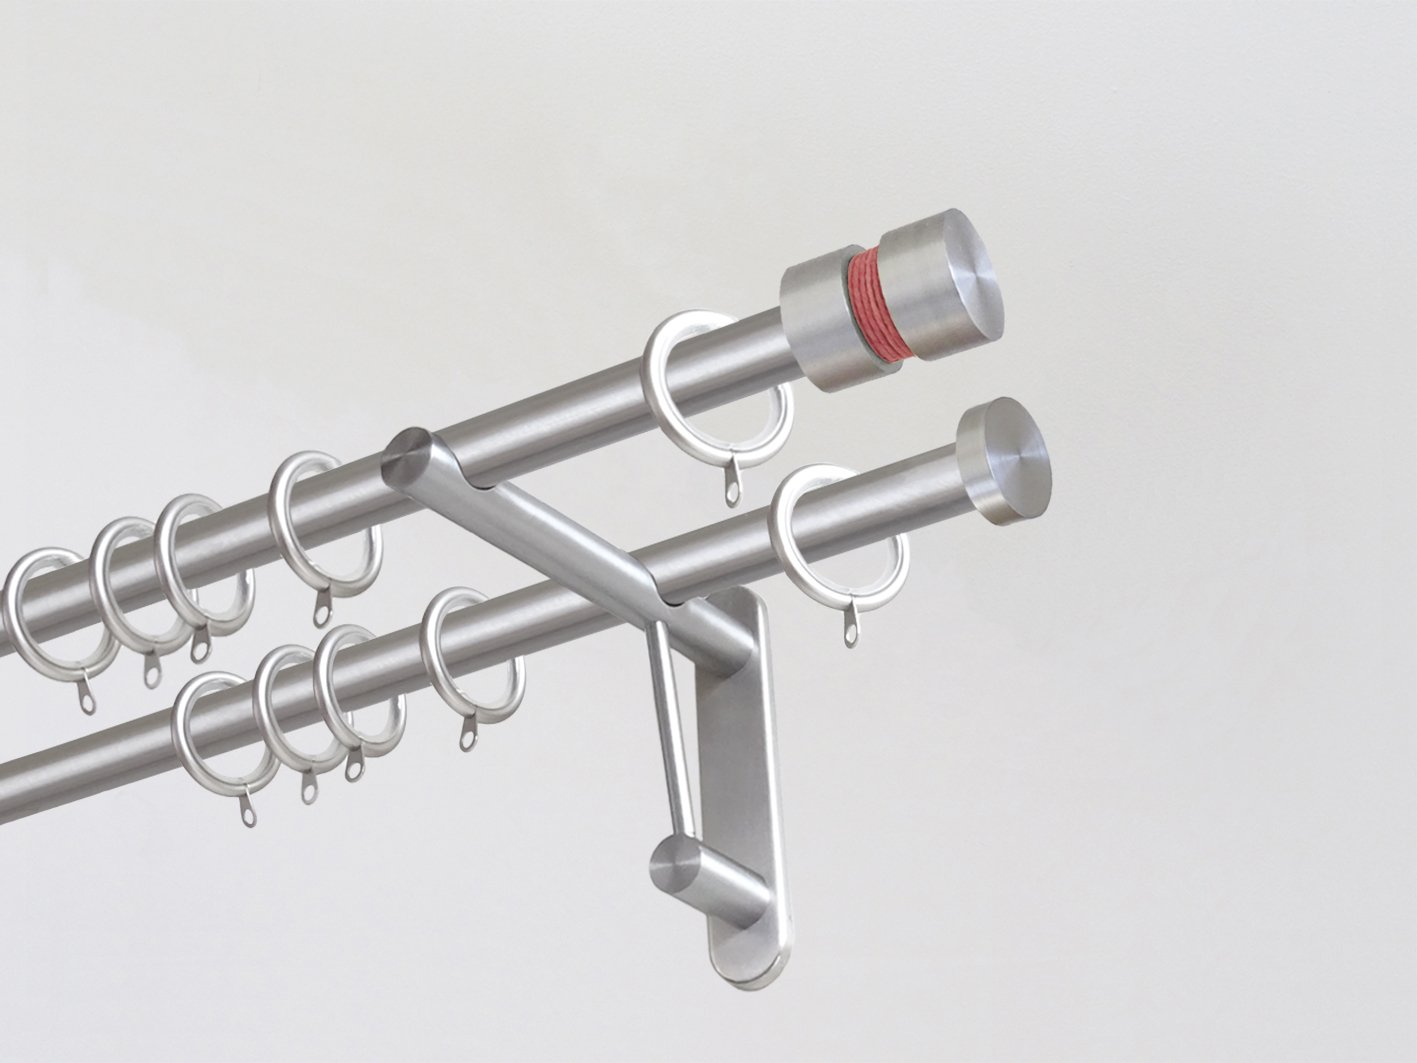 19mm diameter double stainless steel curtain pole duo system set with groove finials & coral twine